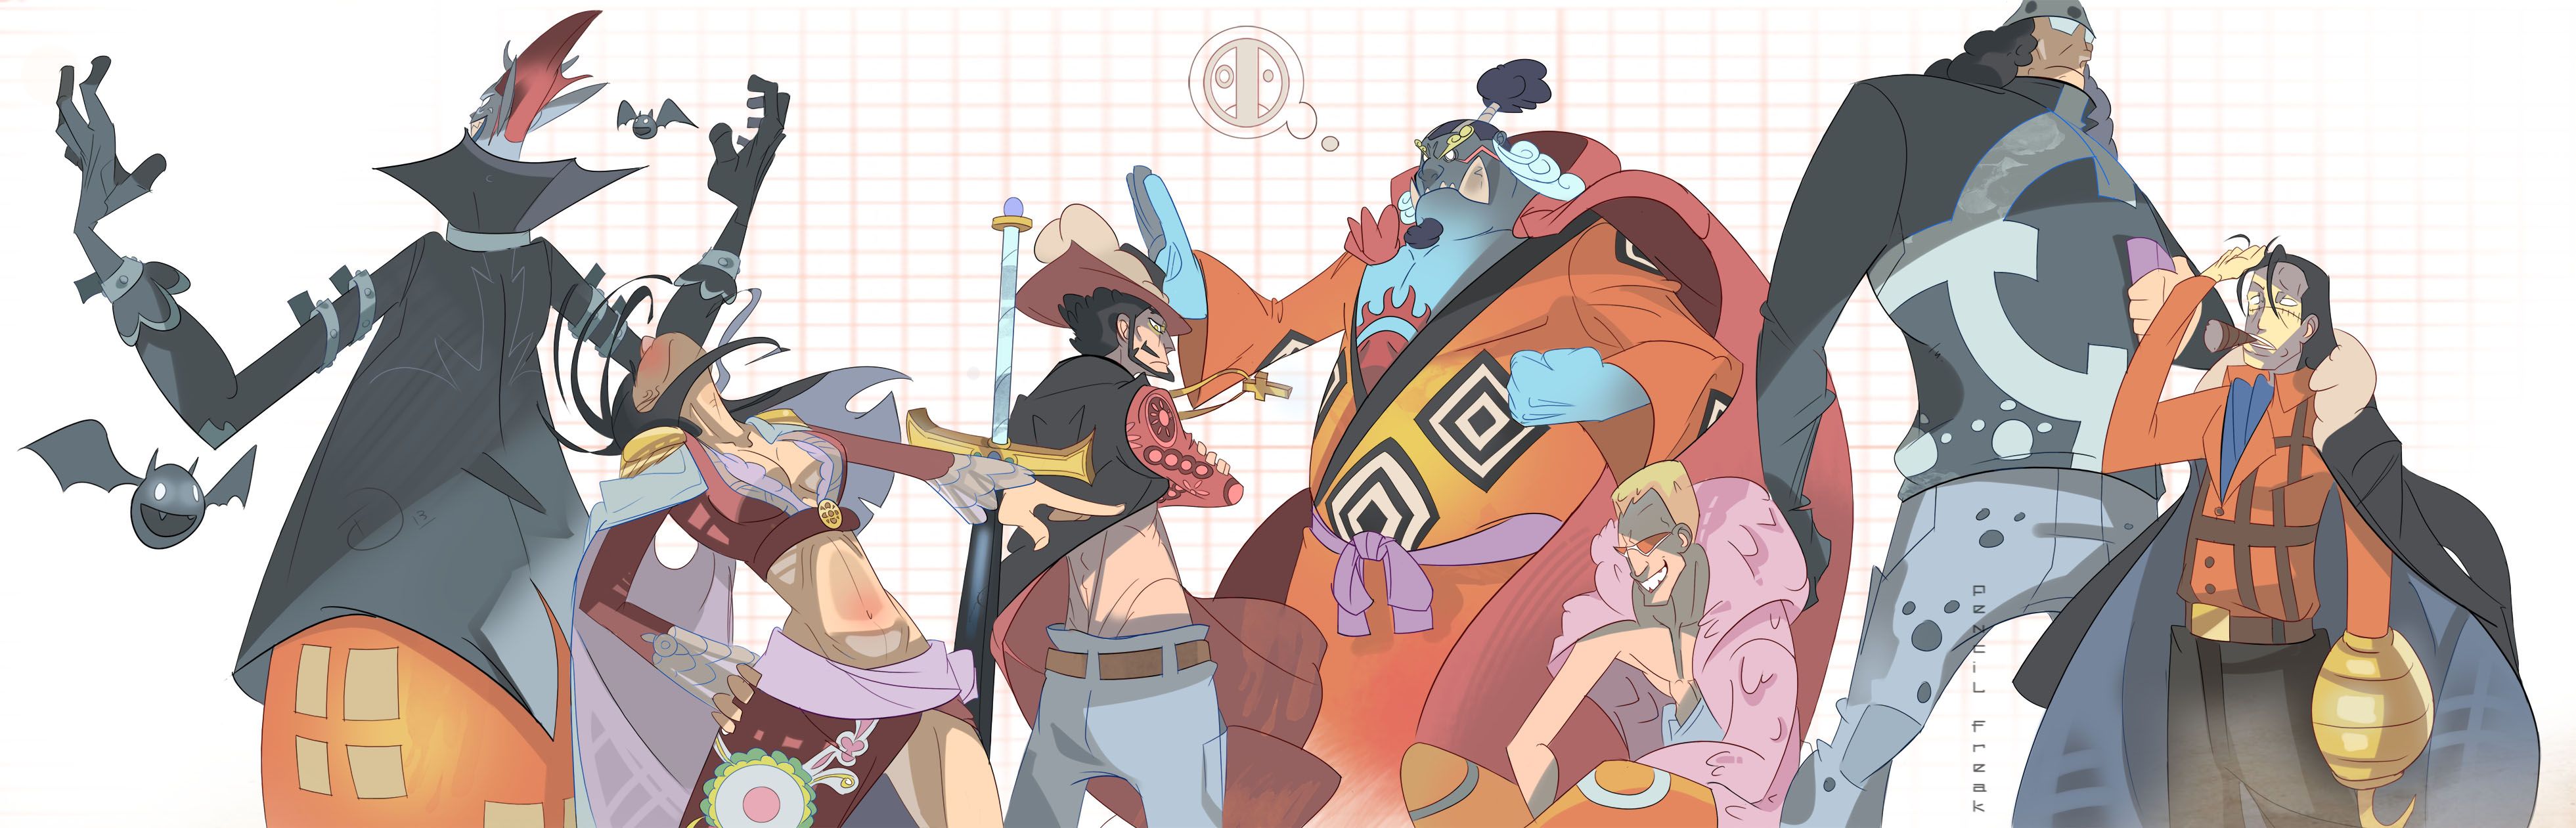 Warlords By G Jaggerjack. One Piece Anime, One Piece Crew, Anime Fnaf